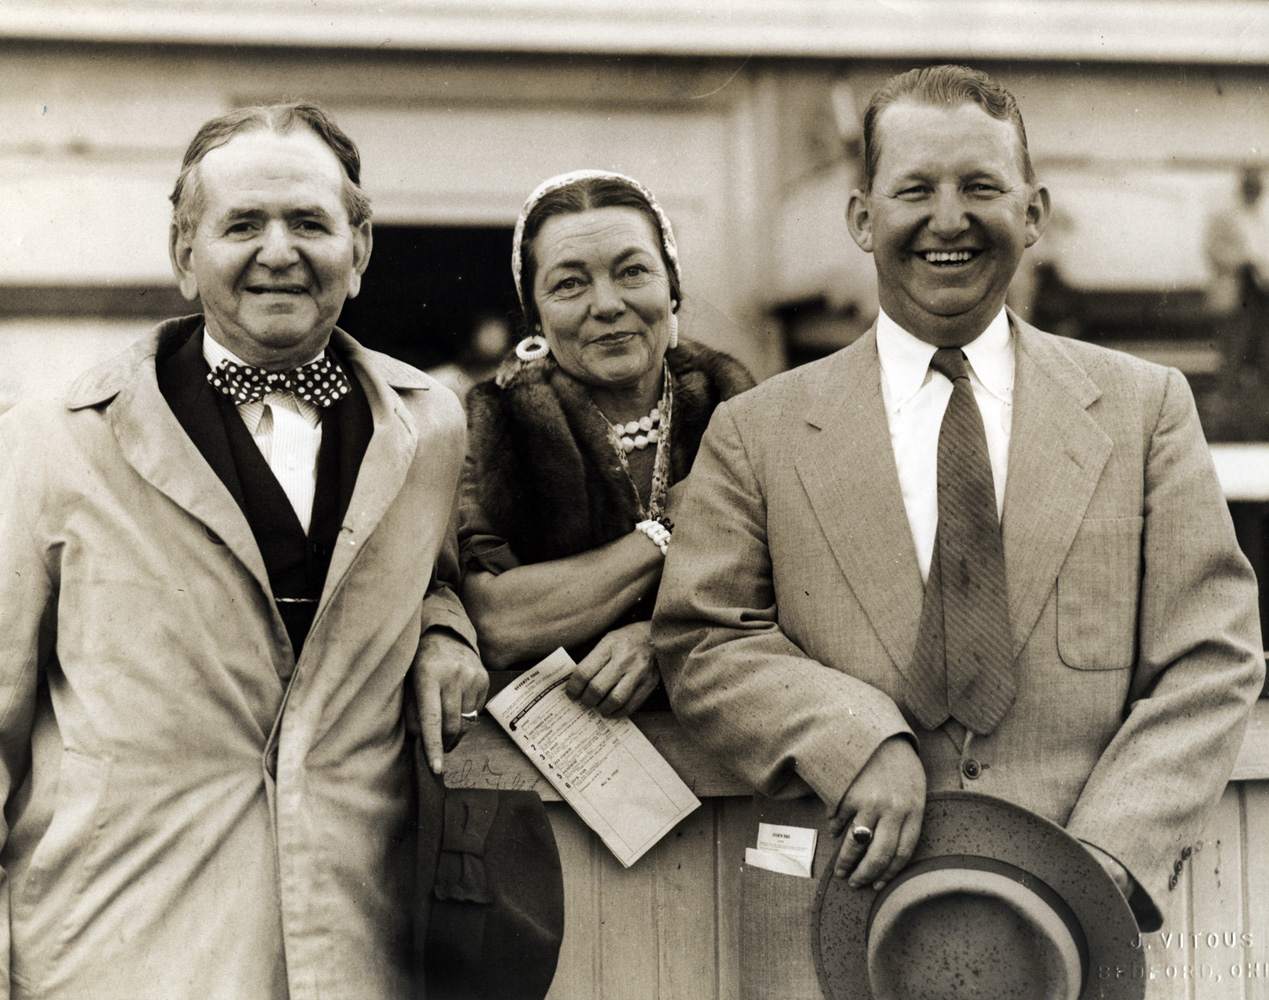 Harry Trotsek (on right) with horse owners Mr. and Mrs. A. E. Reuben at Churchill Downs, May 1953 (Museum Collection)